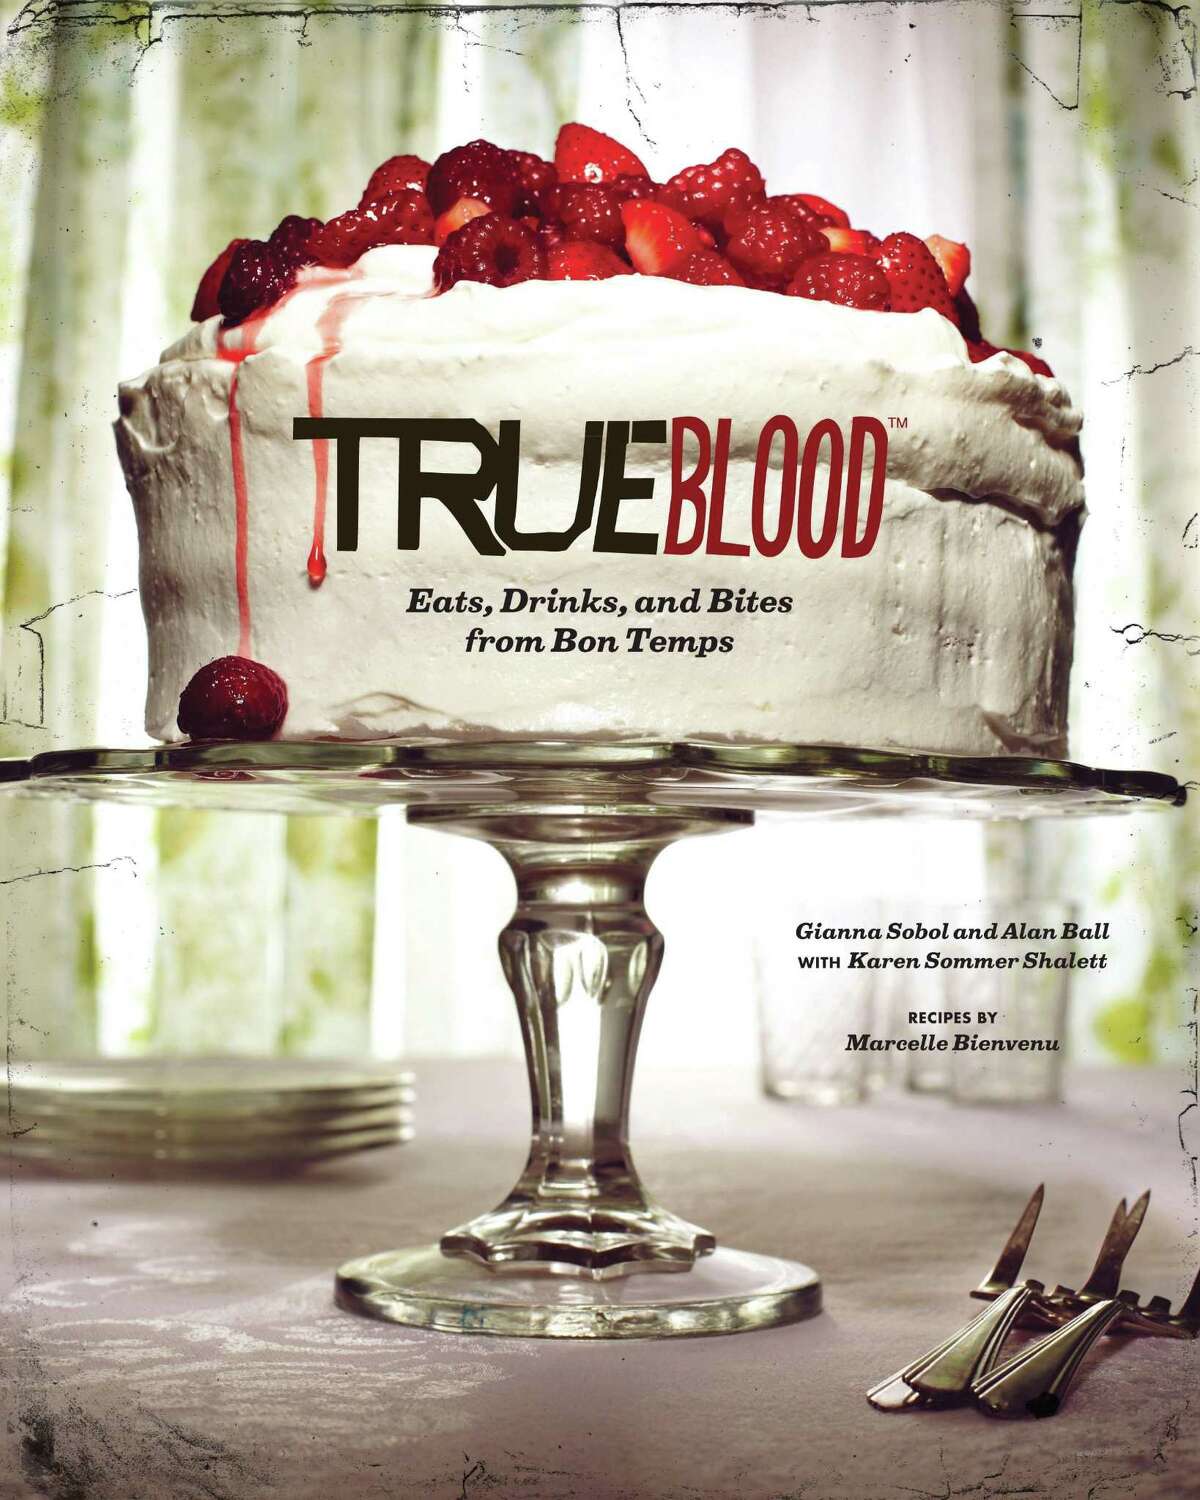 This book cover image released by Chronicle Books shows "True Blood: East, Drinks, and Bites from Bon Temps," a cookbook with recipes by Marcelle Bienvenu. (AP Photo/Chronicle Books)